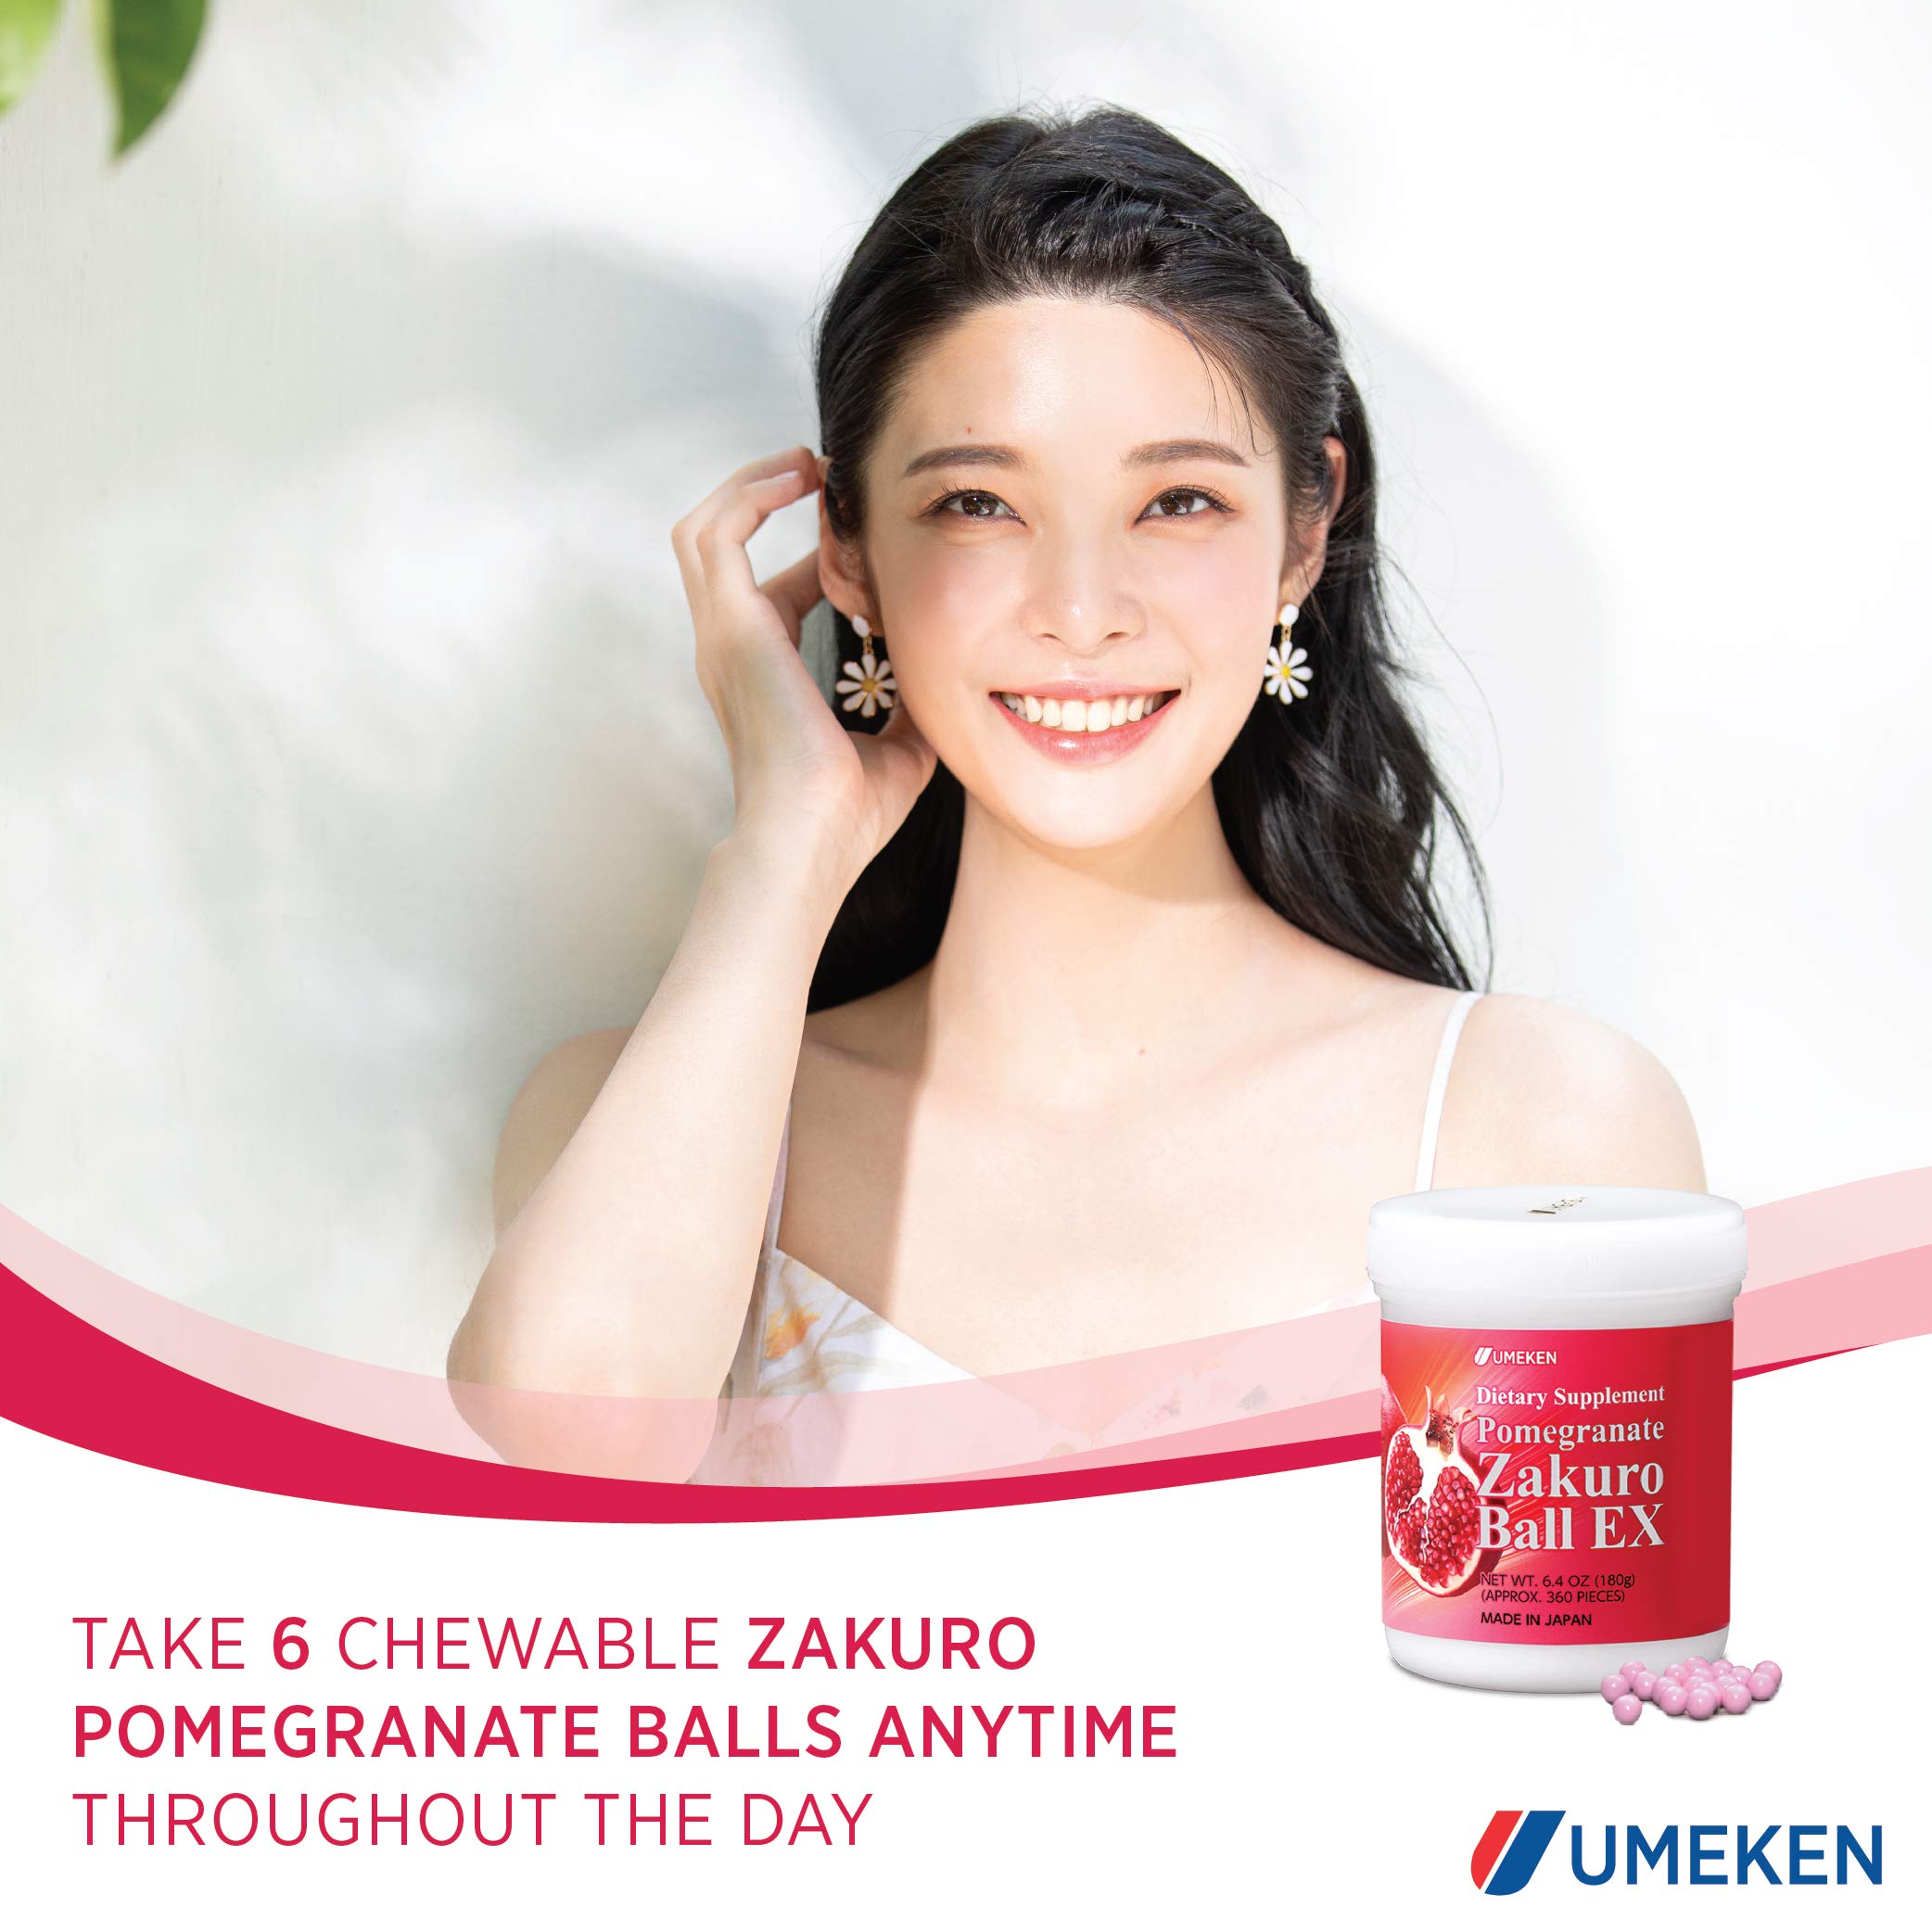 Umeken Pomegranate Extract Zakuro Balls - 360 Pieces (2 Month Supply), Pack of 2 Bottles, Chewable Supplement with Natural Vitamins, Minerals, Citric Acids, and Tannins